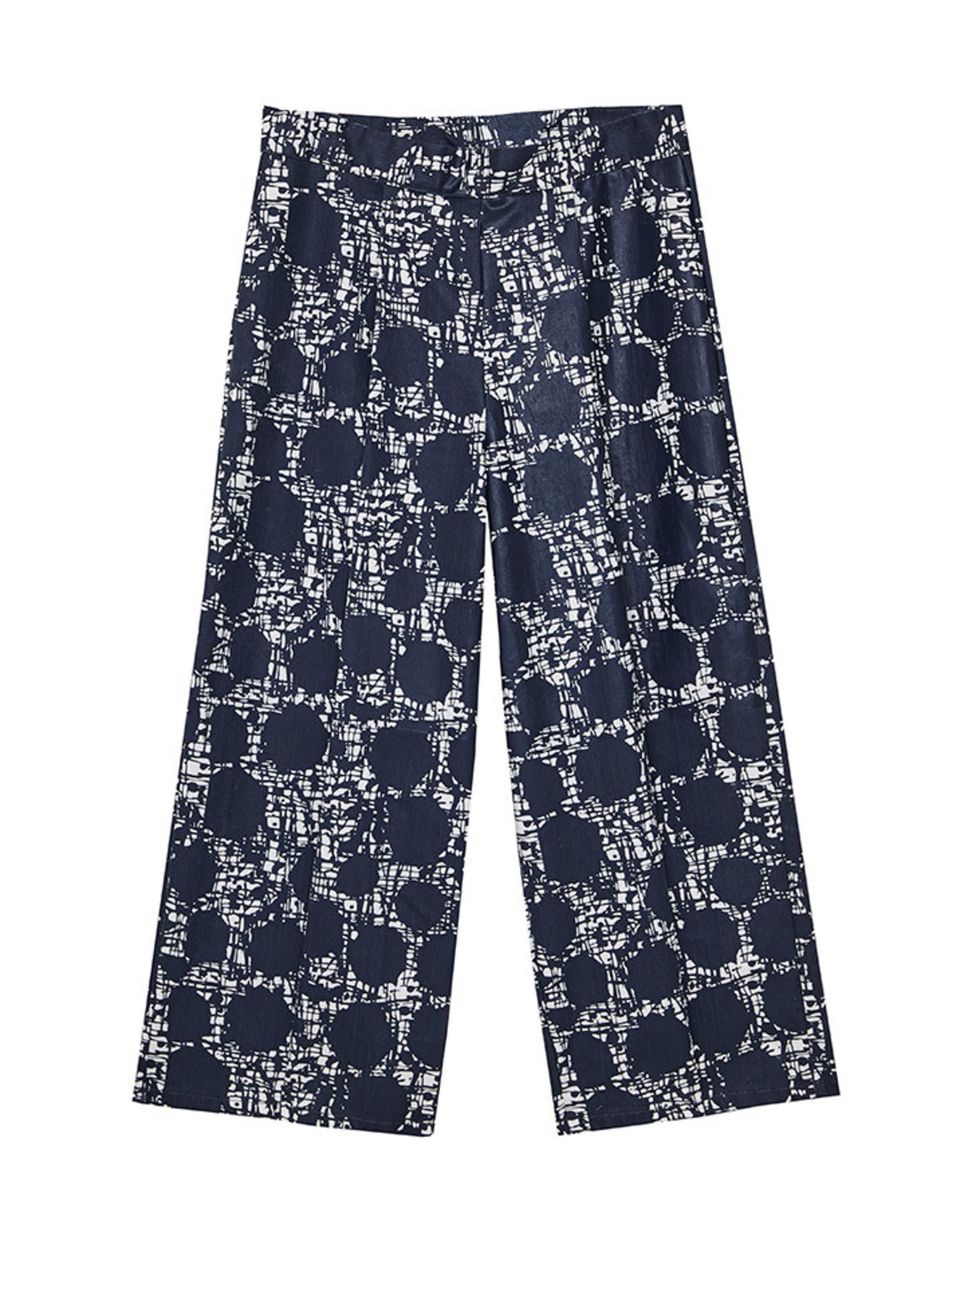 <p><a href="http://www.asos.com/ASOS-White/ASOS-WHITE-Denim-Culottes-in-Scribble-Spot-Print/Prod/pgeproduct.aspx?iid=6078766&cid=11761&sh=0&pge=0&pgesize=36&sort=-1&clr=White%2fnavy&totalstyles=166&gridsize=3" target="_blank">ASOS WHITE Denim Culottes in 